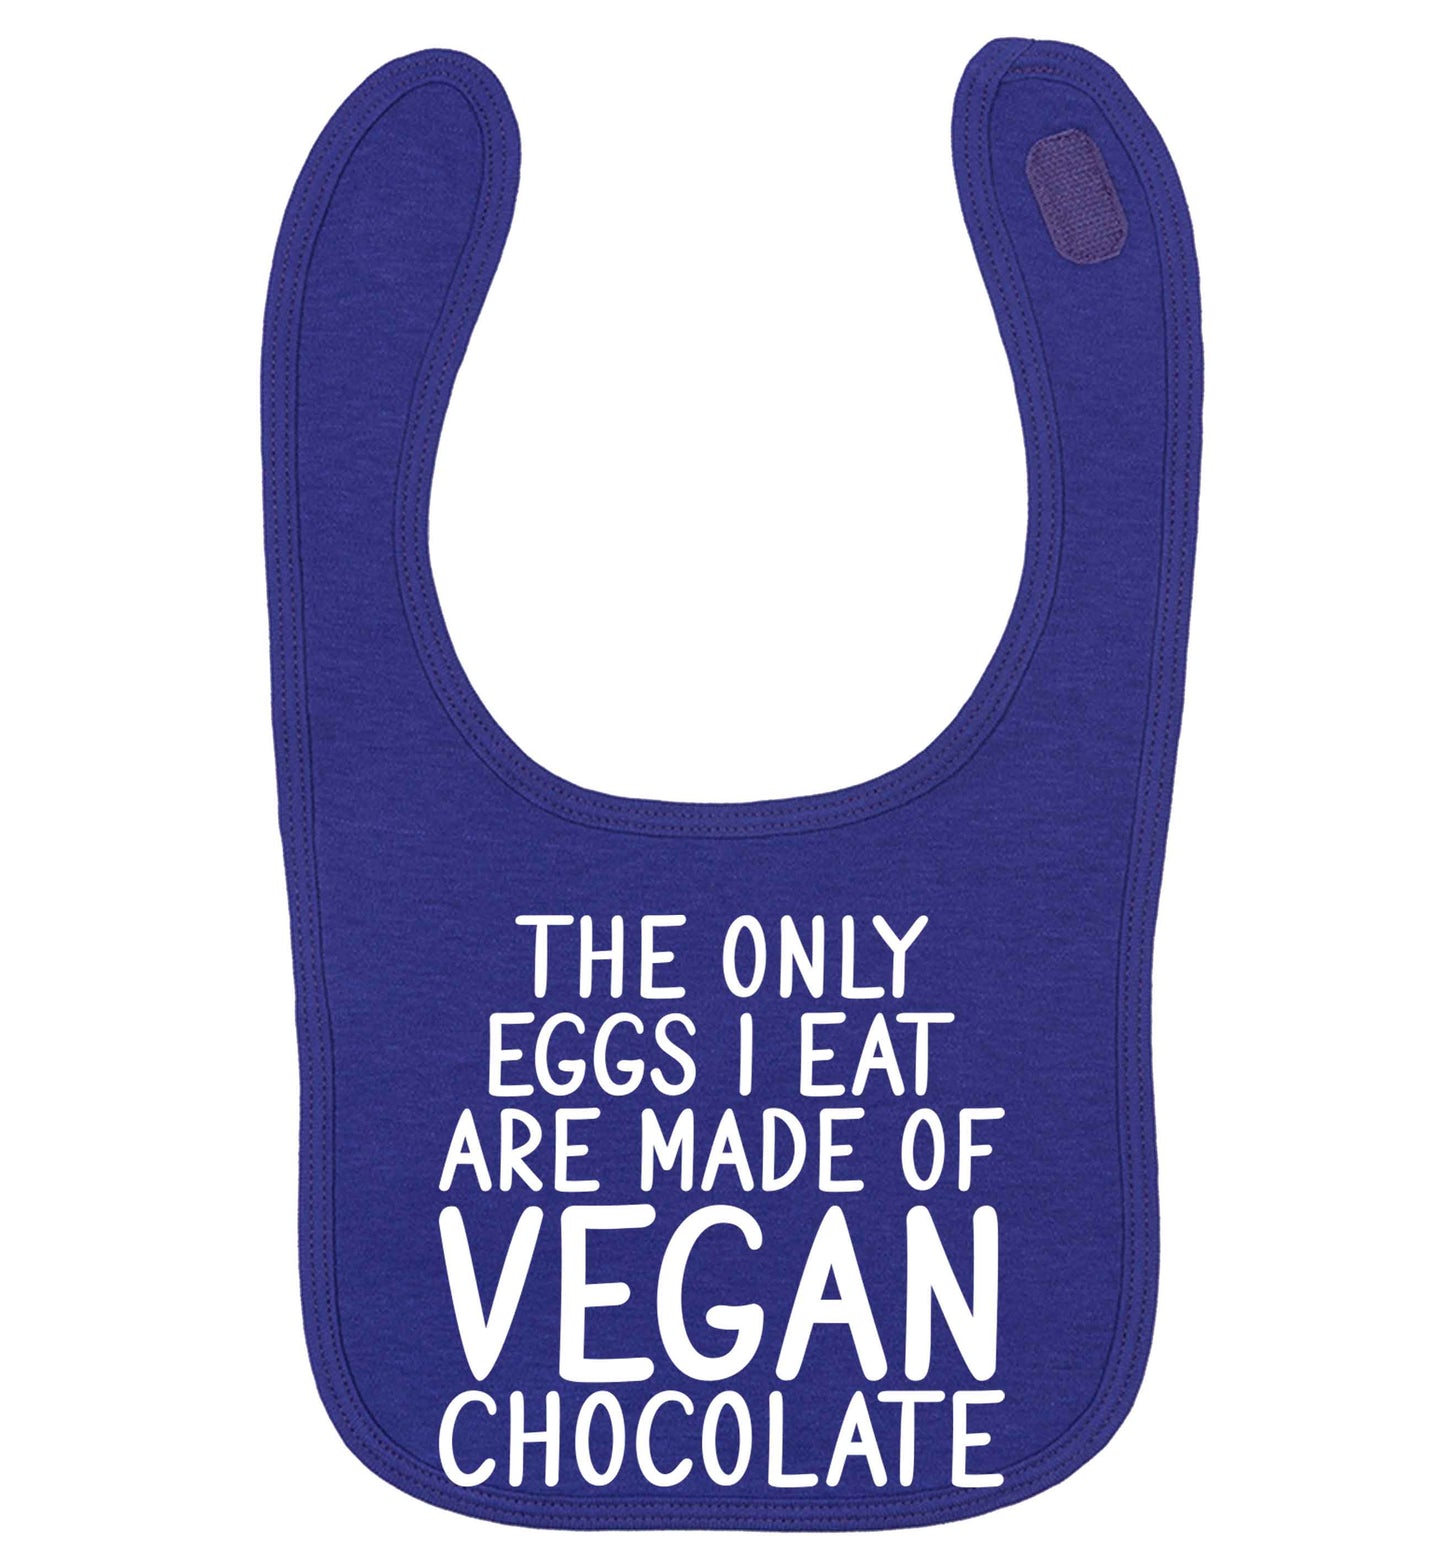 The only eggs I eat are made of vegan chocolate | baby bib